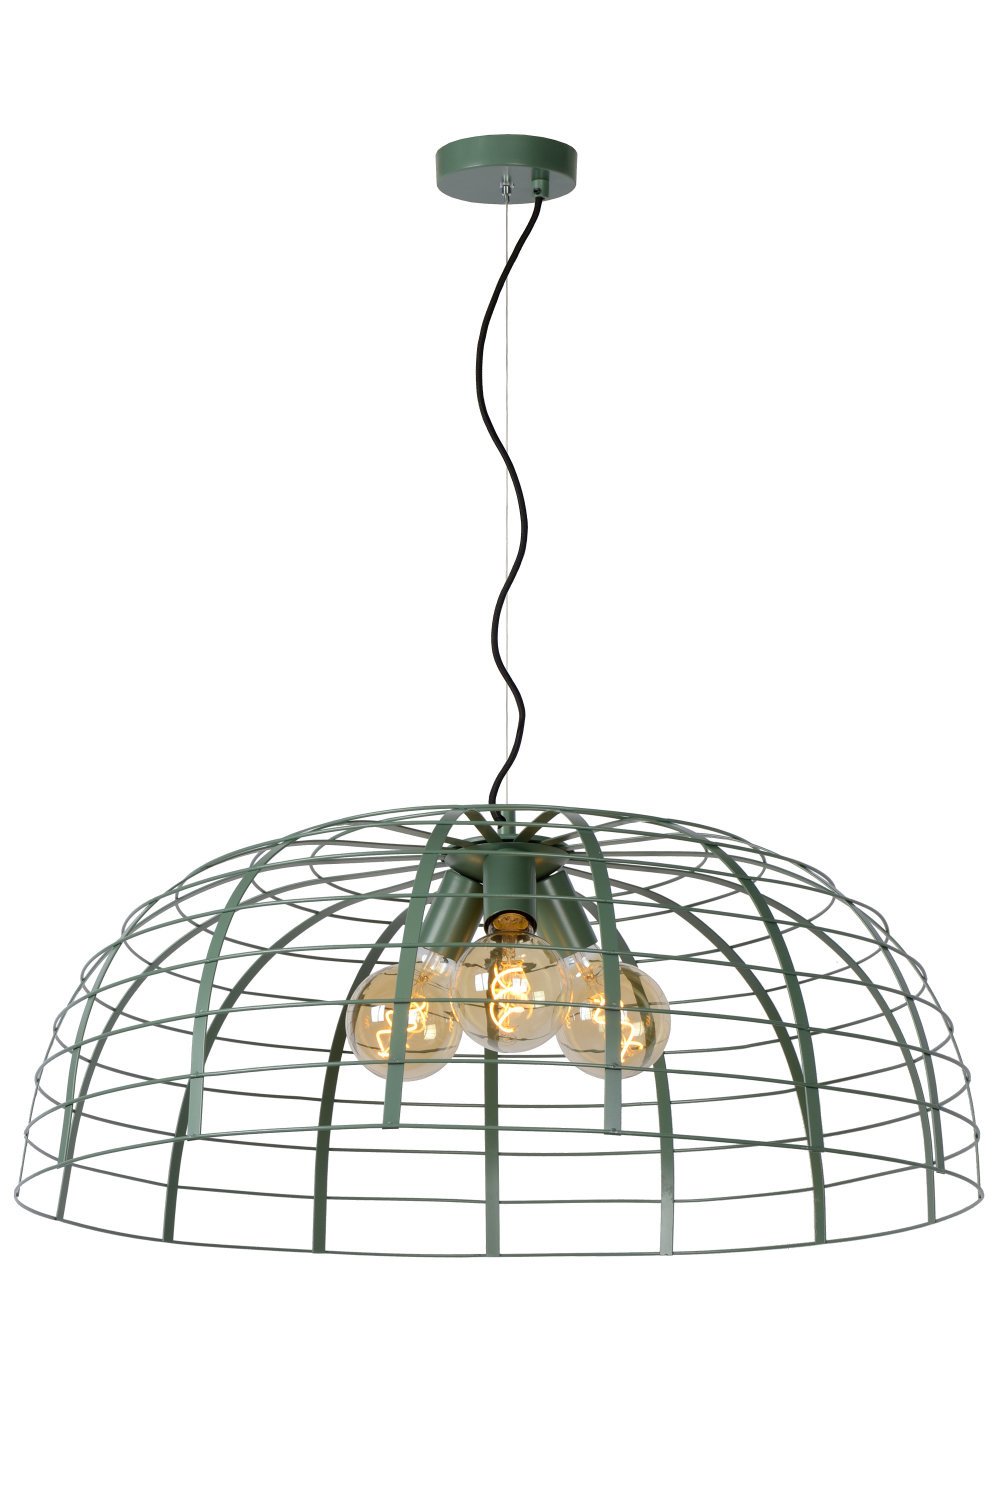 Lucide ELODIE Hanglamp-Turkoo.-Ø76-3xE27-40W-Staal